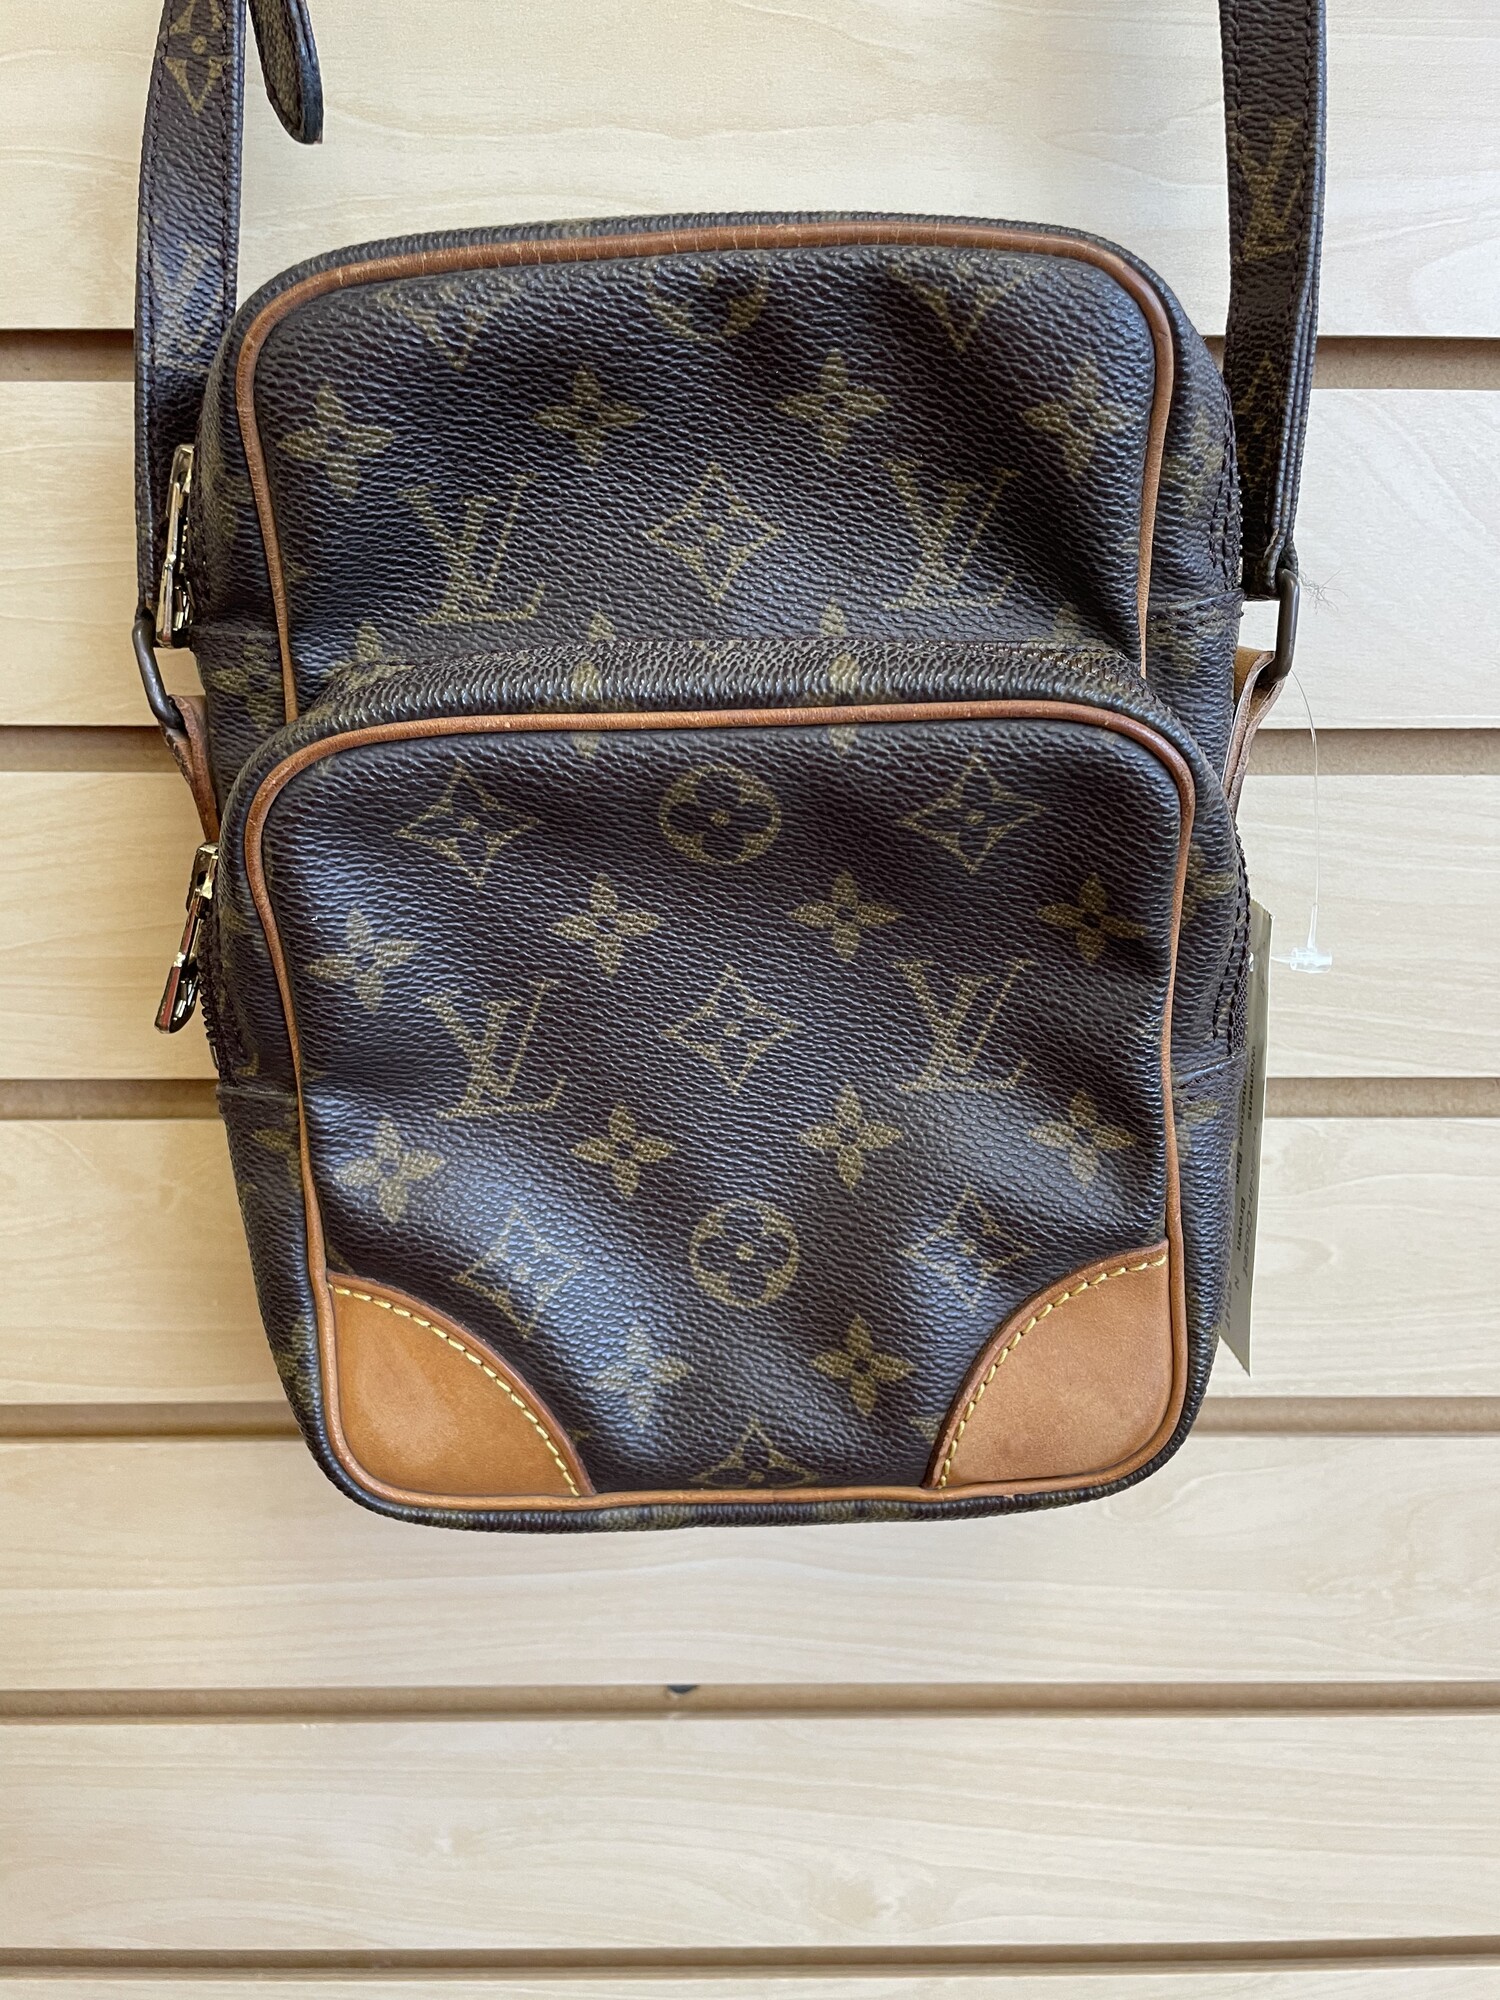 LV Amazone Bag, Brown with VL Monogram, Front and Back Pockets Have Very Few Interior Scratches, Back Pocket Has a Small Pouch, Some Watermarks and Fading on the Patches at Each Bottom Corner and the Shoulder Grip, Size: Base length: 5.75 in, Height: 8.25 in, Width: 3.5 in, Drop: 20.5 in